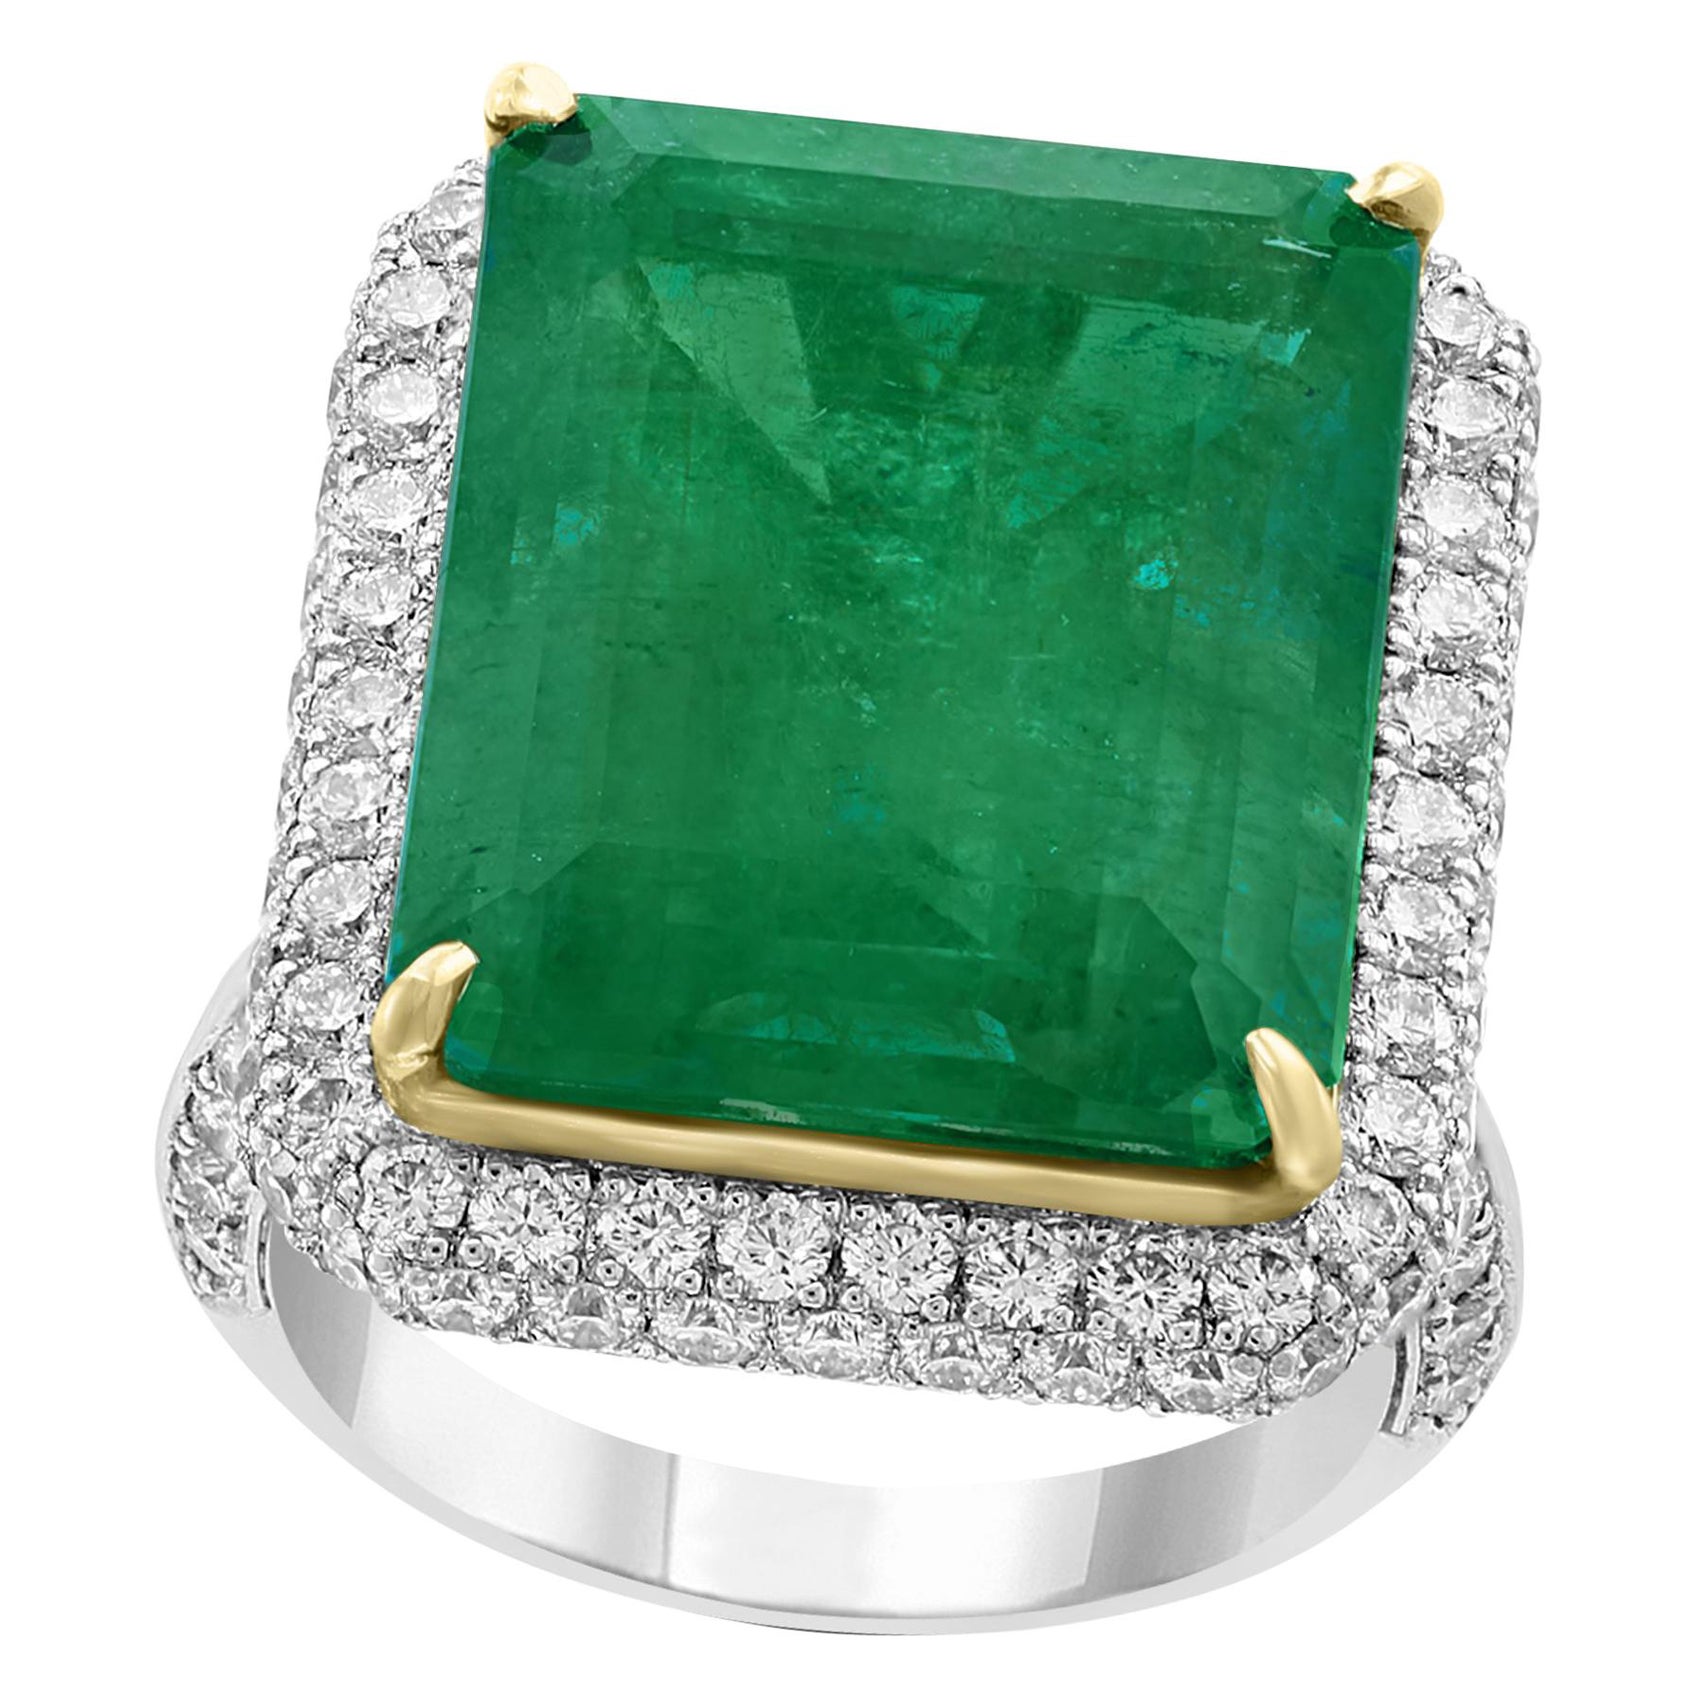 AGL Certified 13.10 Ct Emerald Cut Colombian Emerald Diamond 18K Gold Ring For Sale